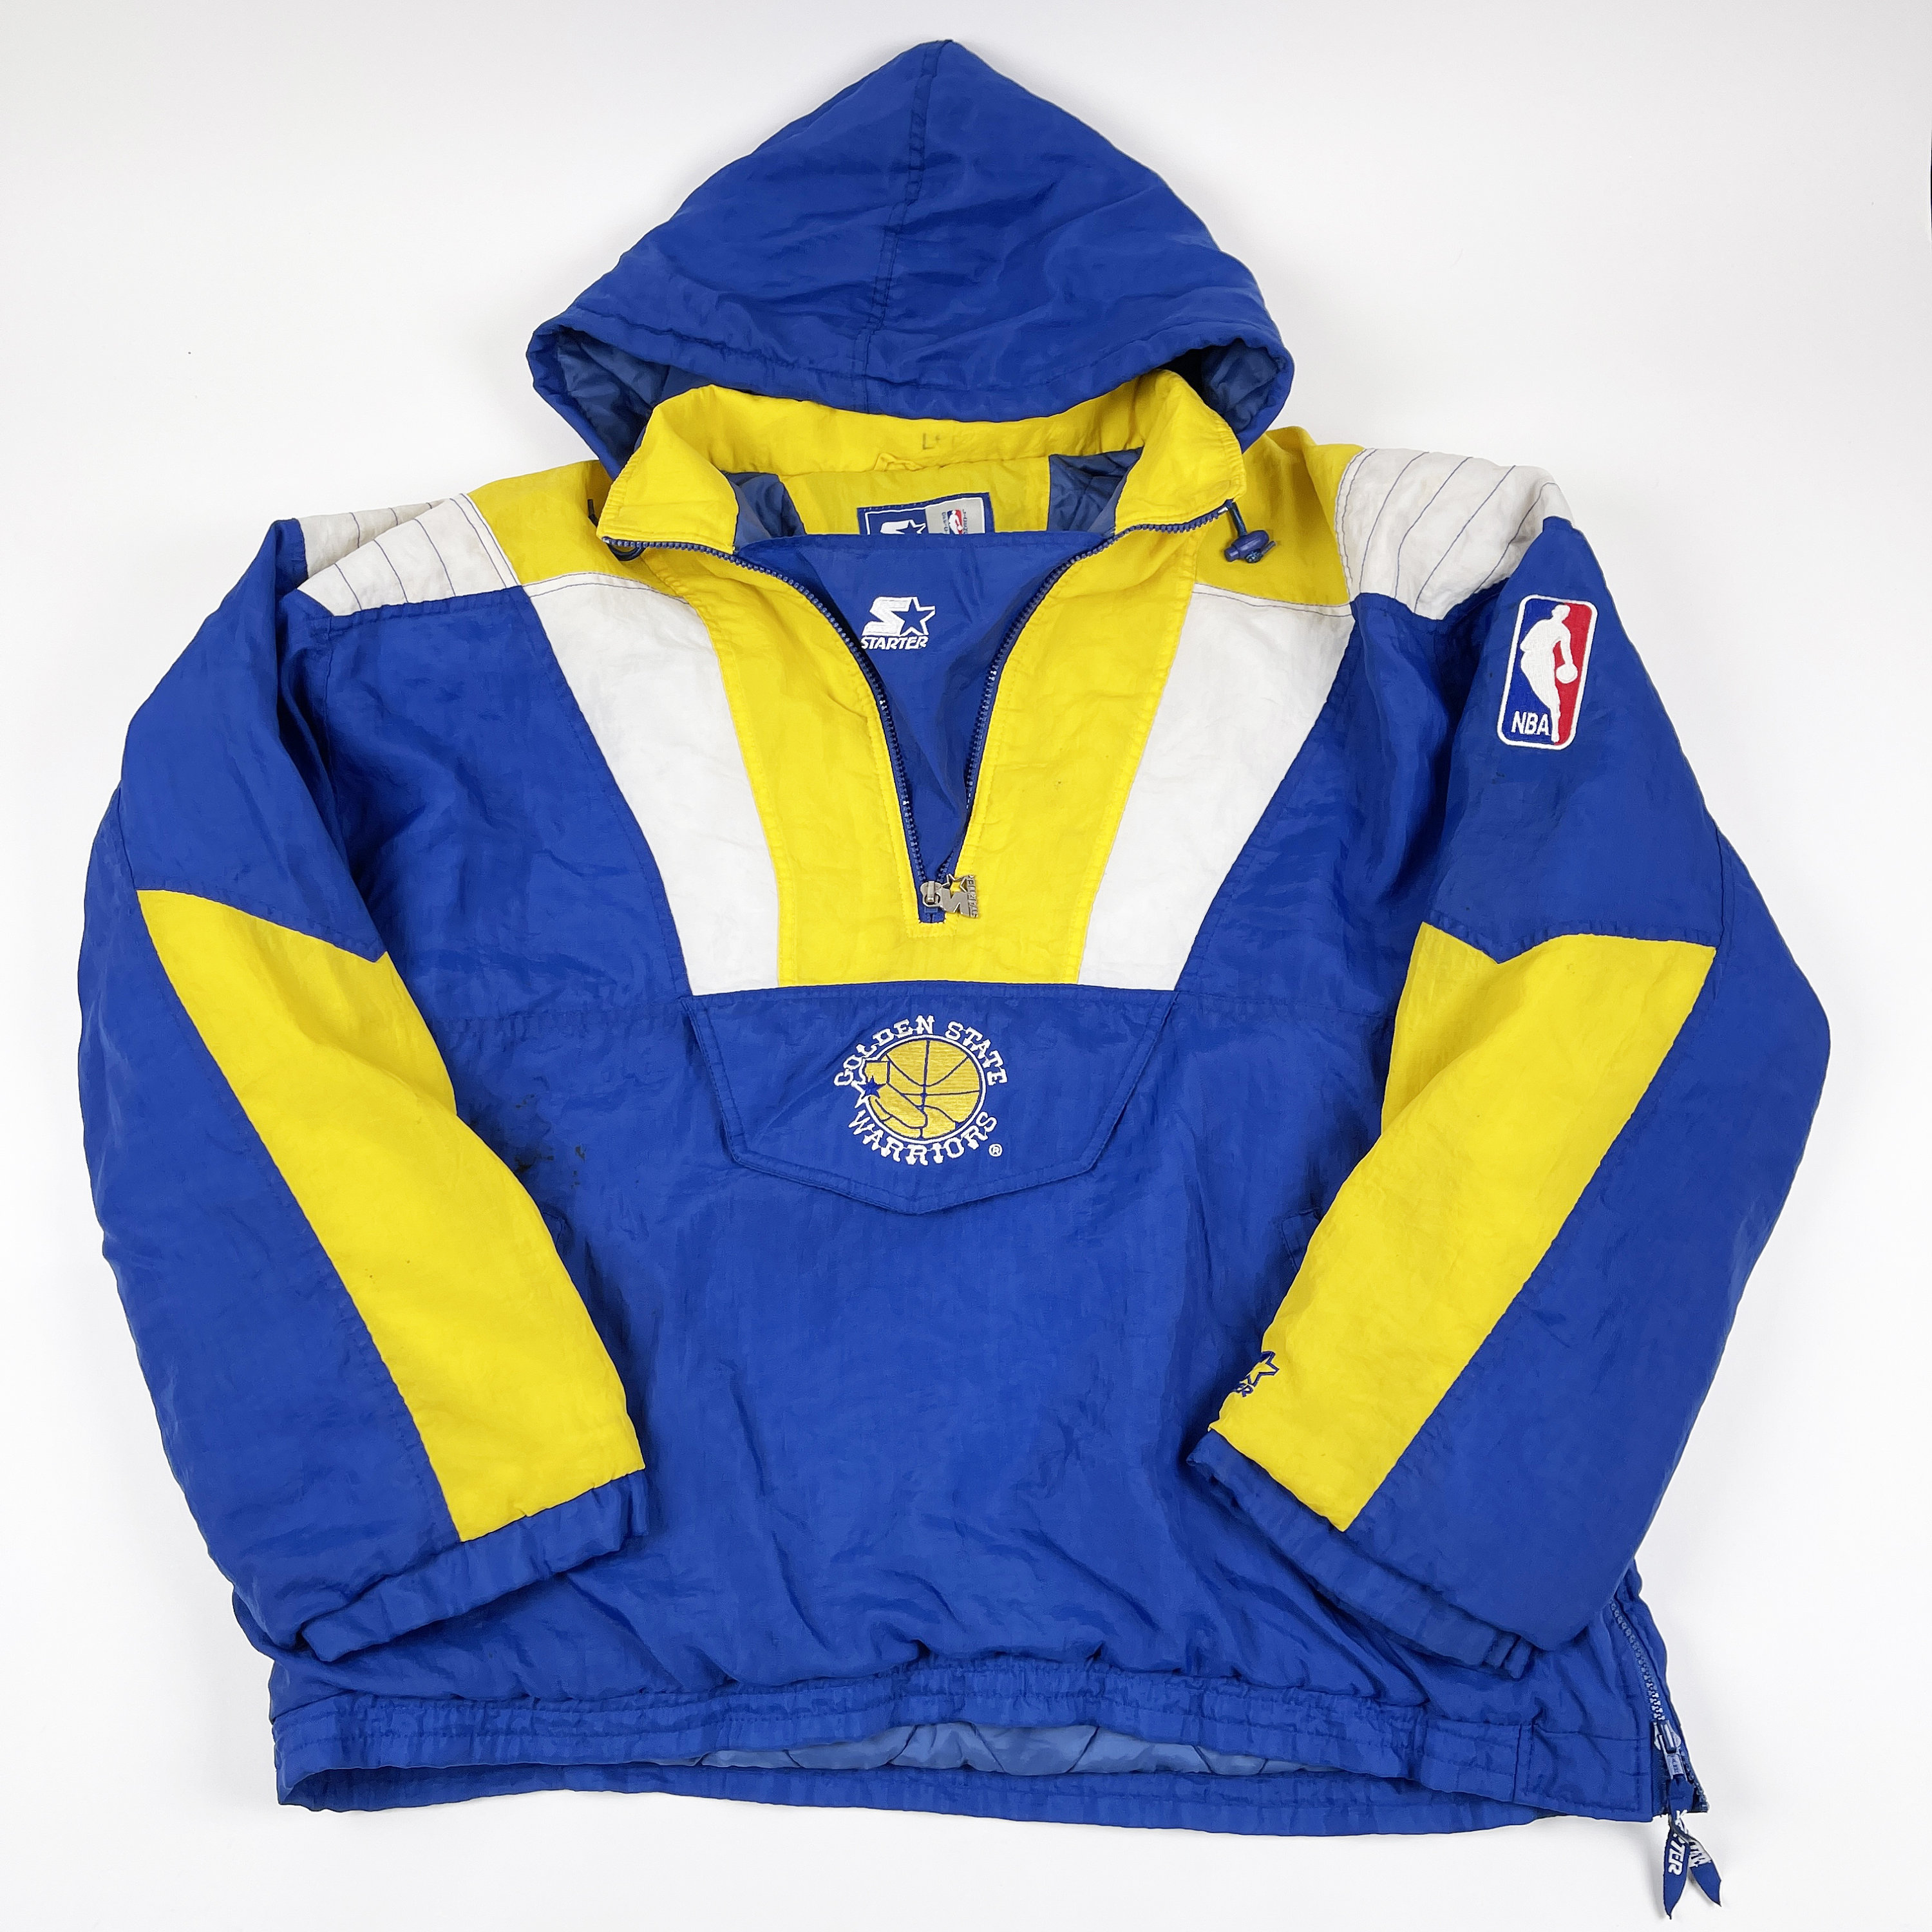 One In A Million Golden State Warriors Sweater Jacket